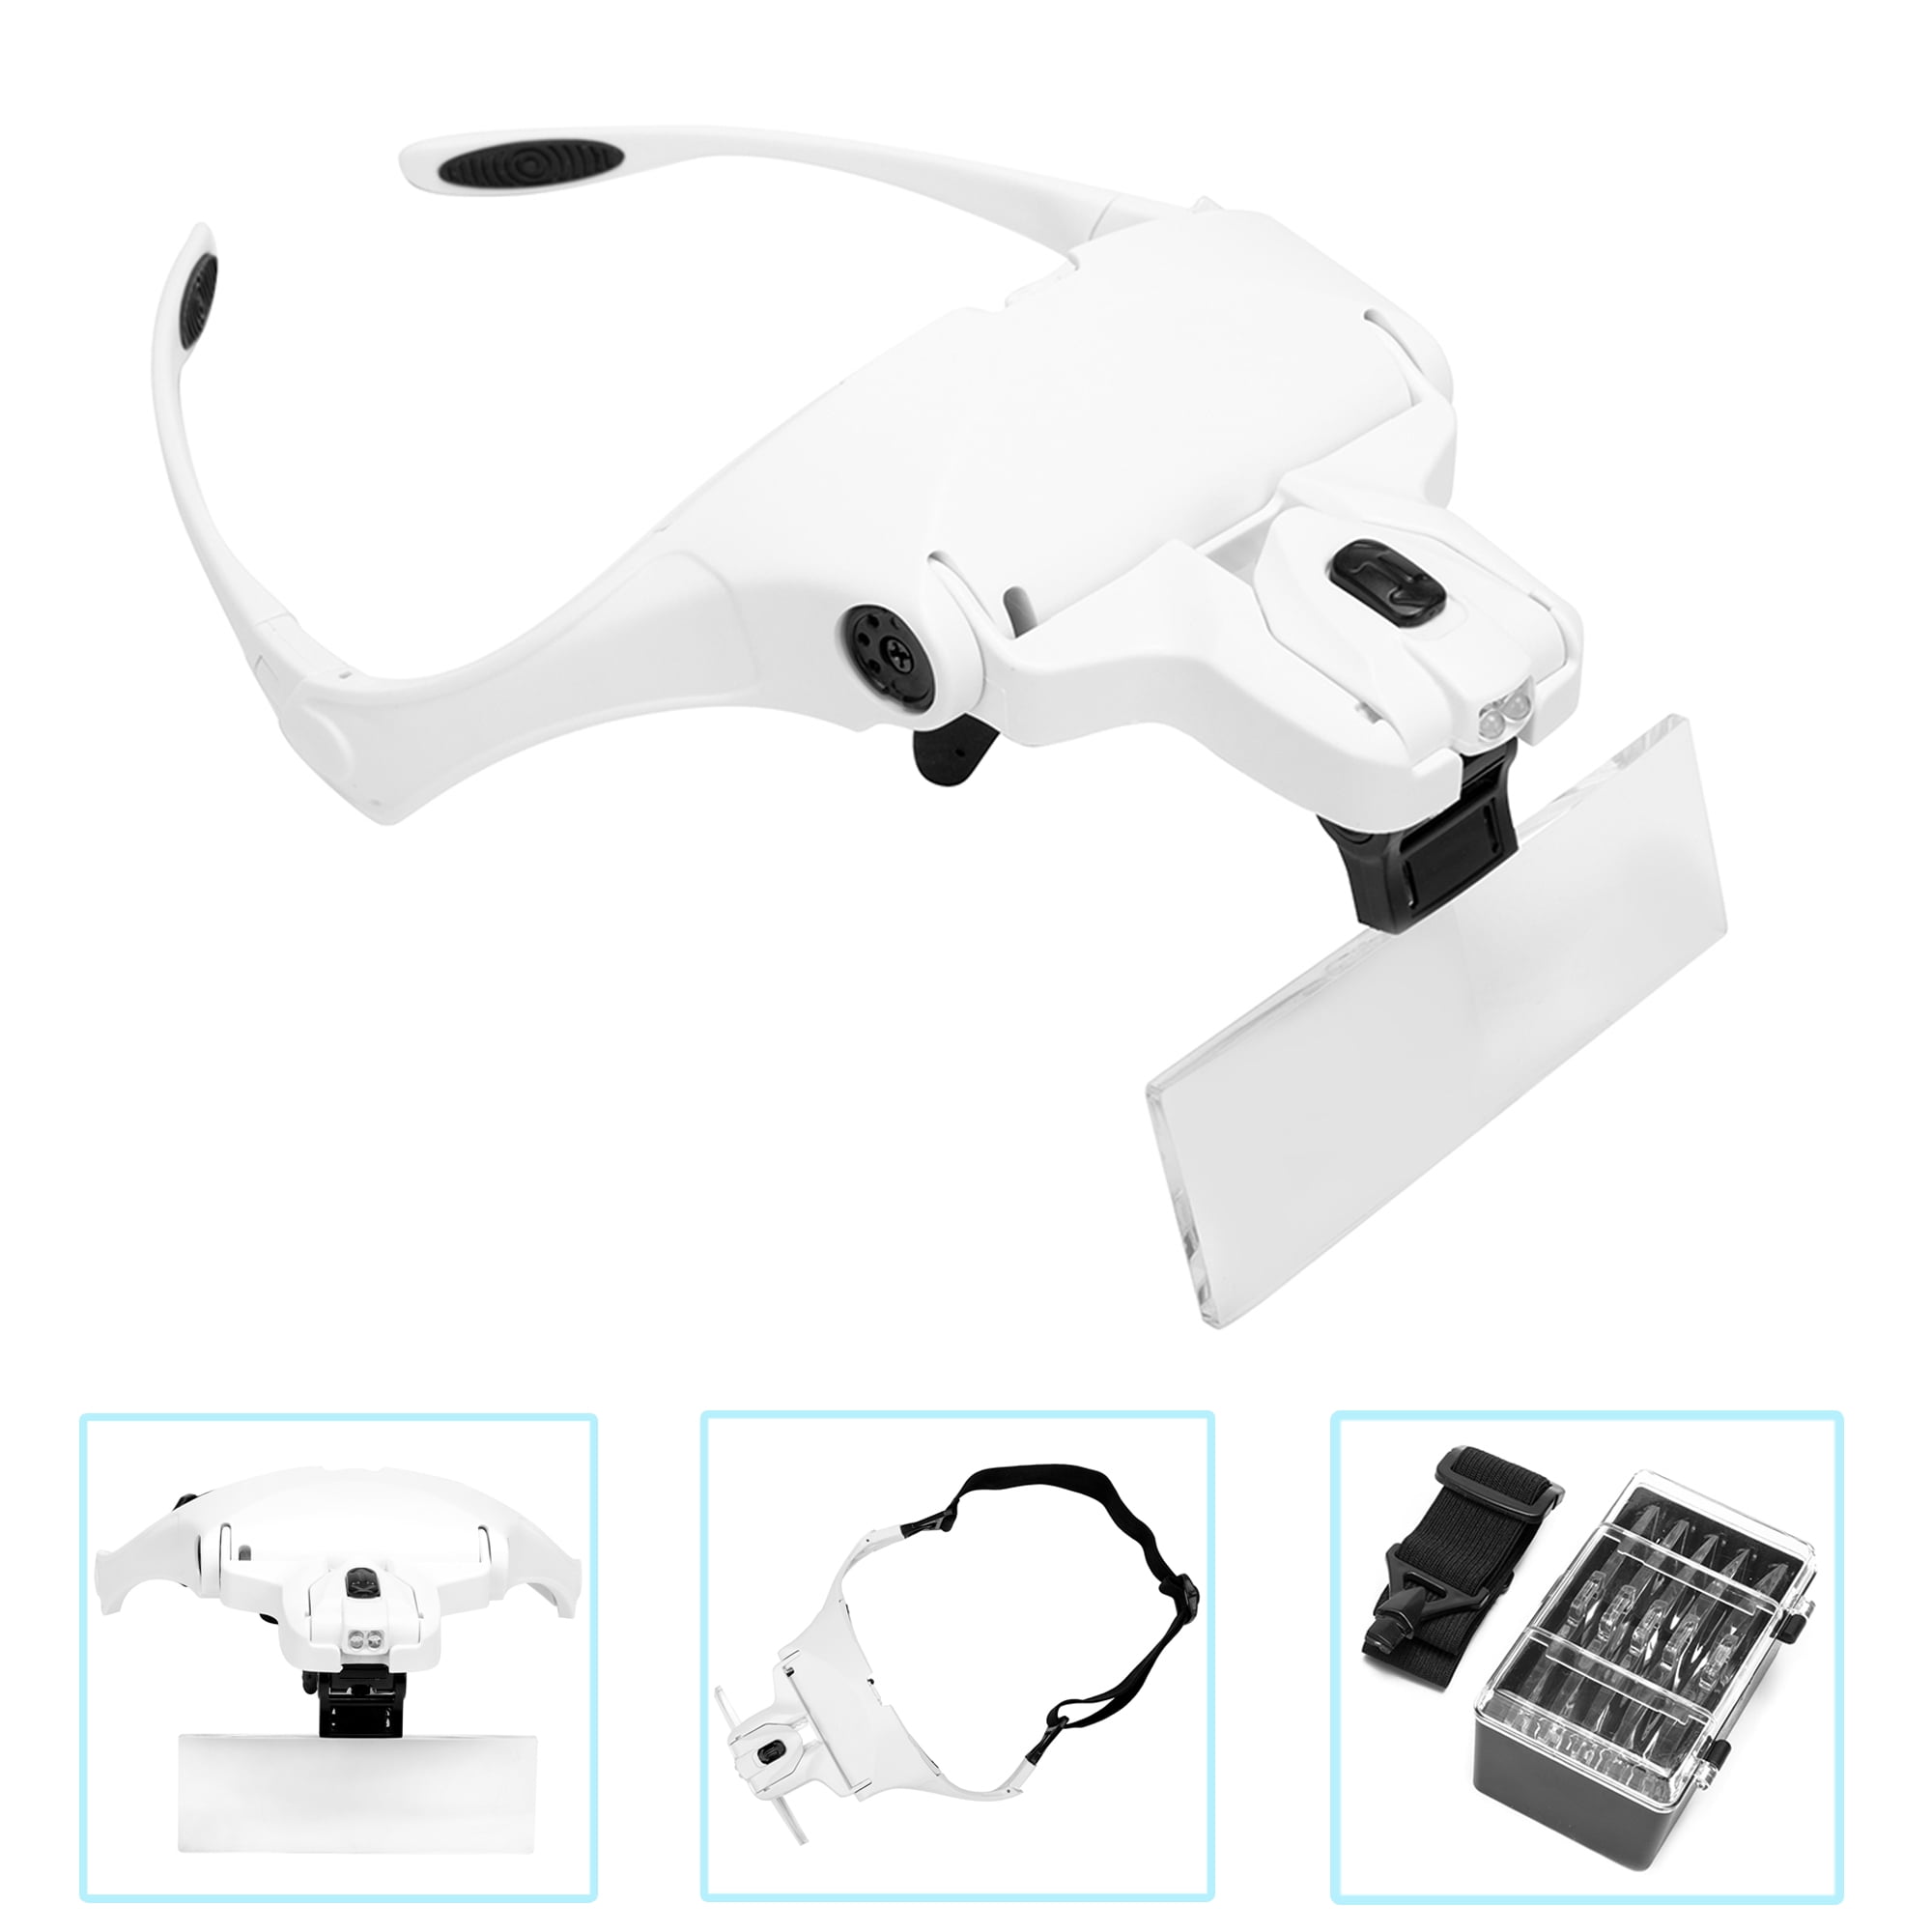 5 Interchangeable Lens Magnifier Loupe with LED Lights Magnifying Glasses